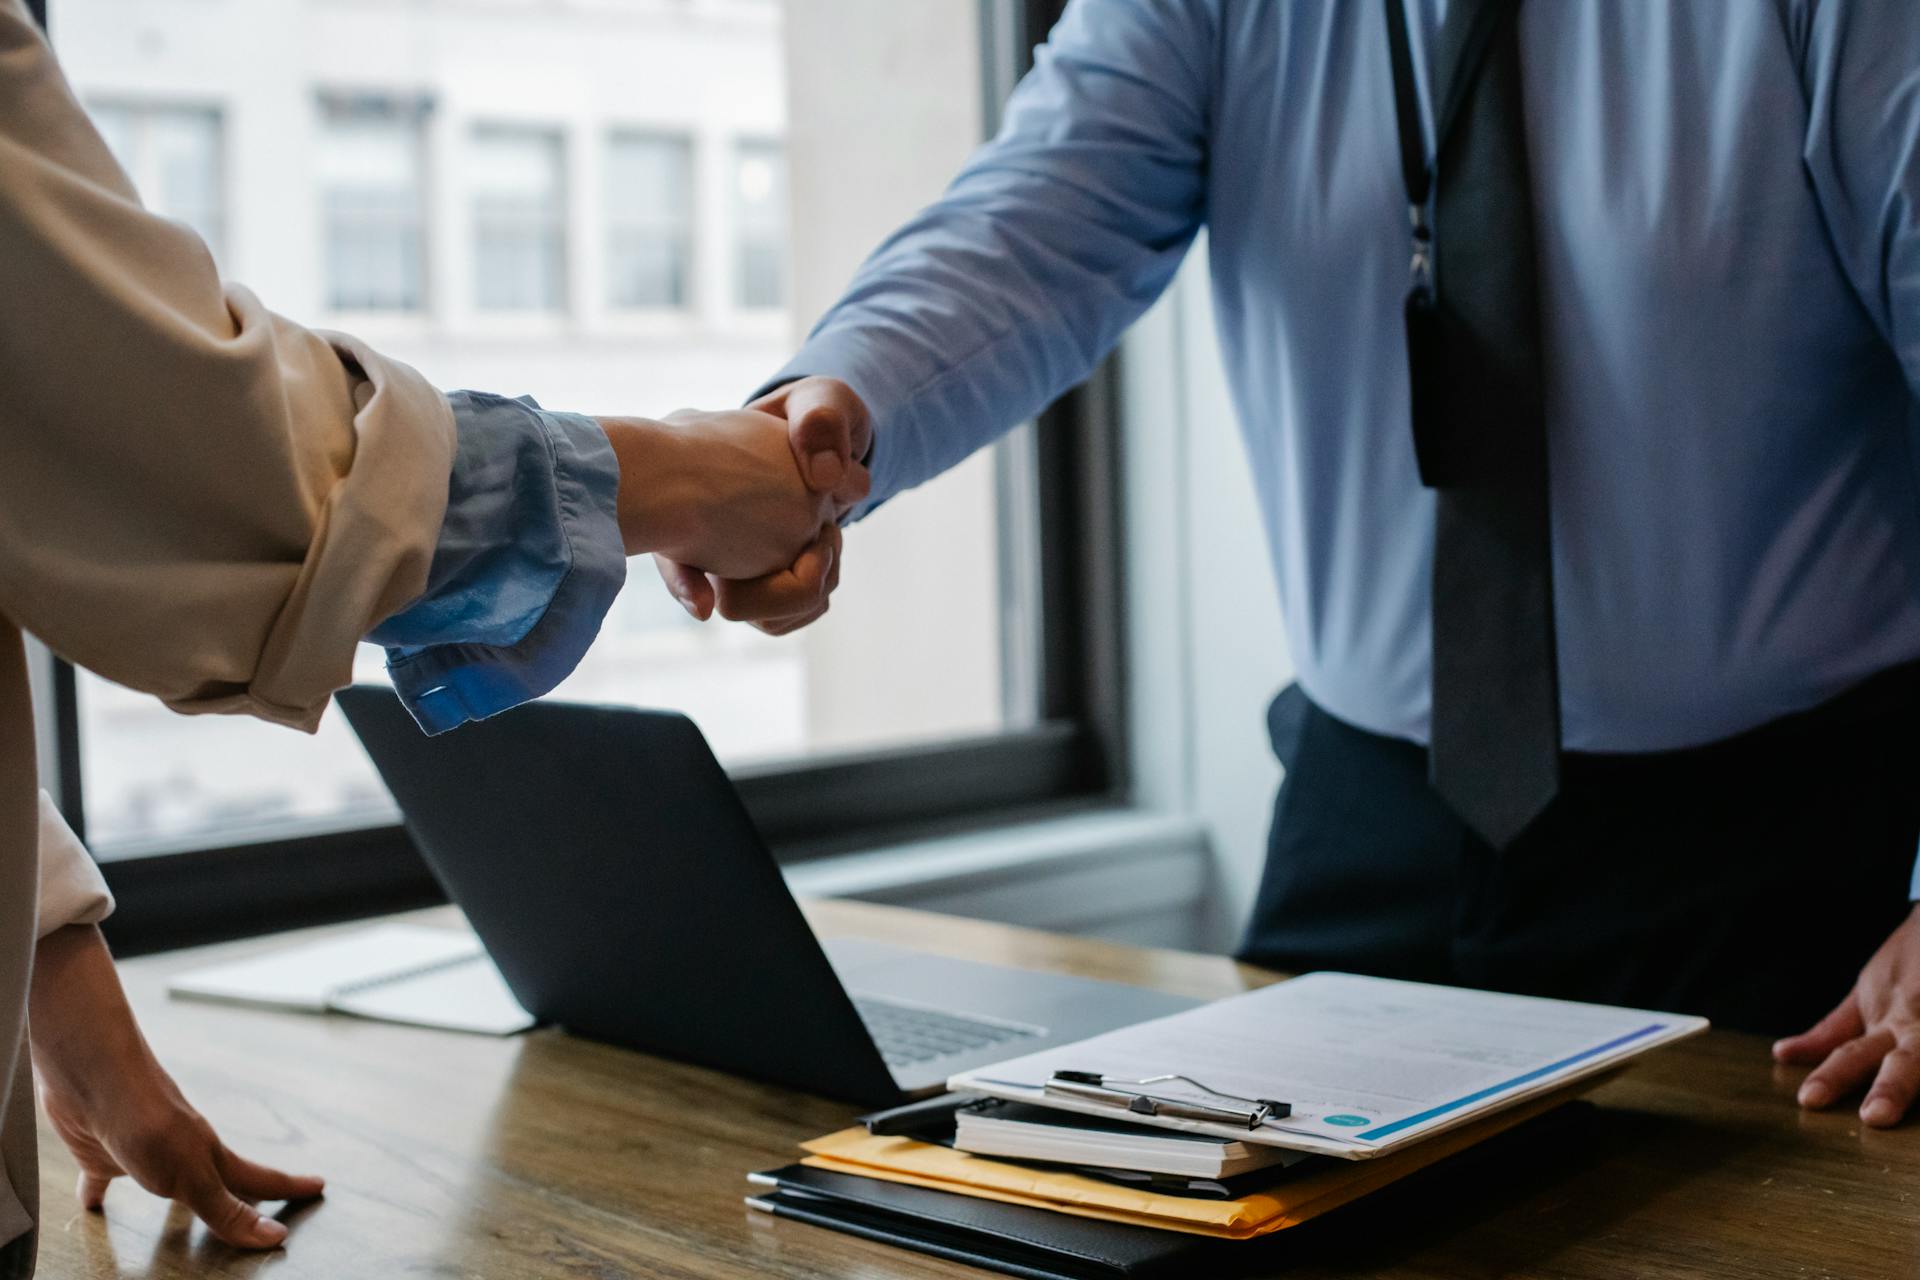 A supervisor shaking hands with their employee in the office | Source: Pexels